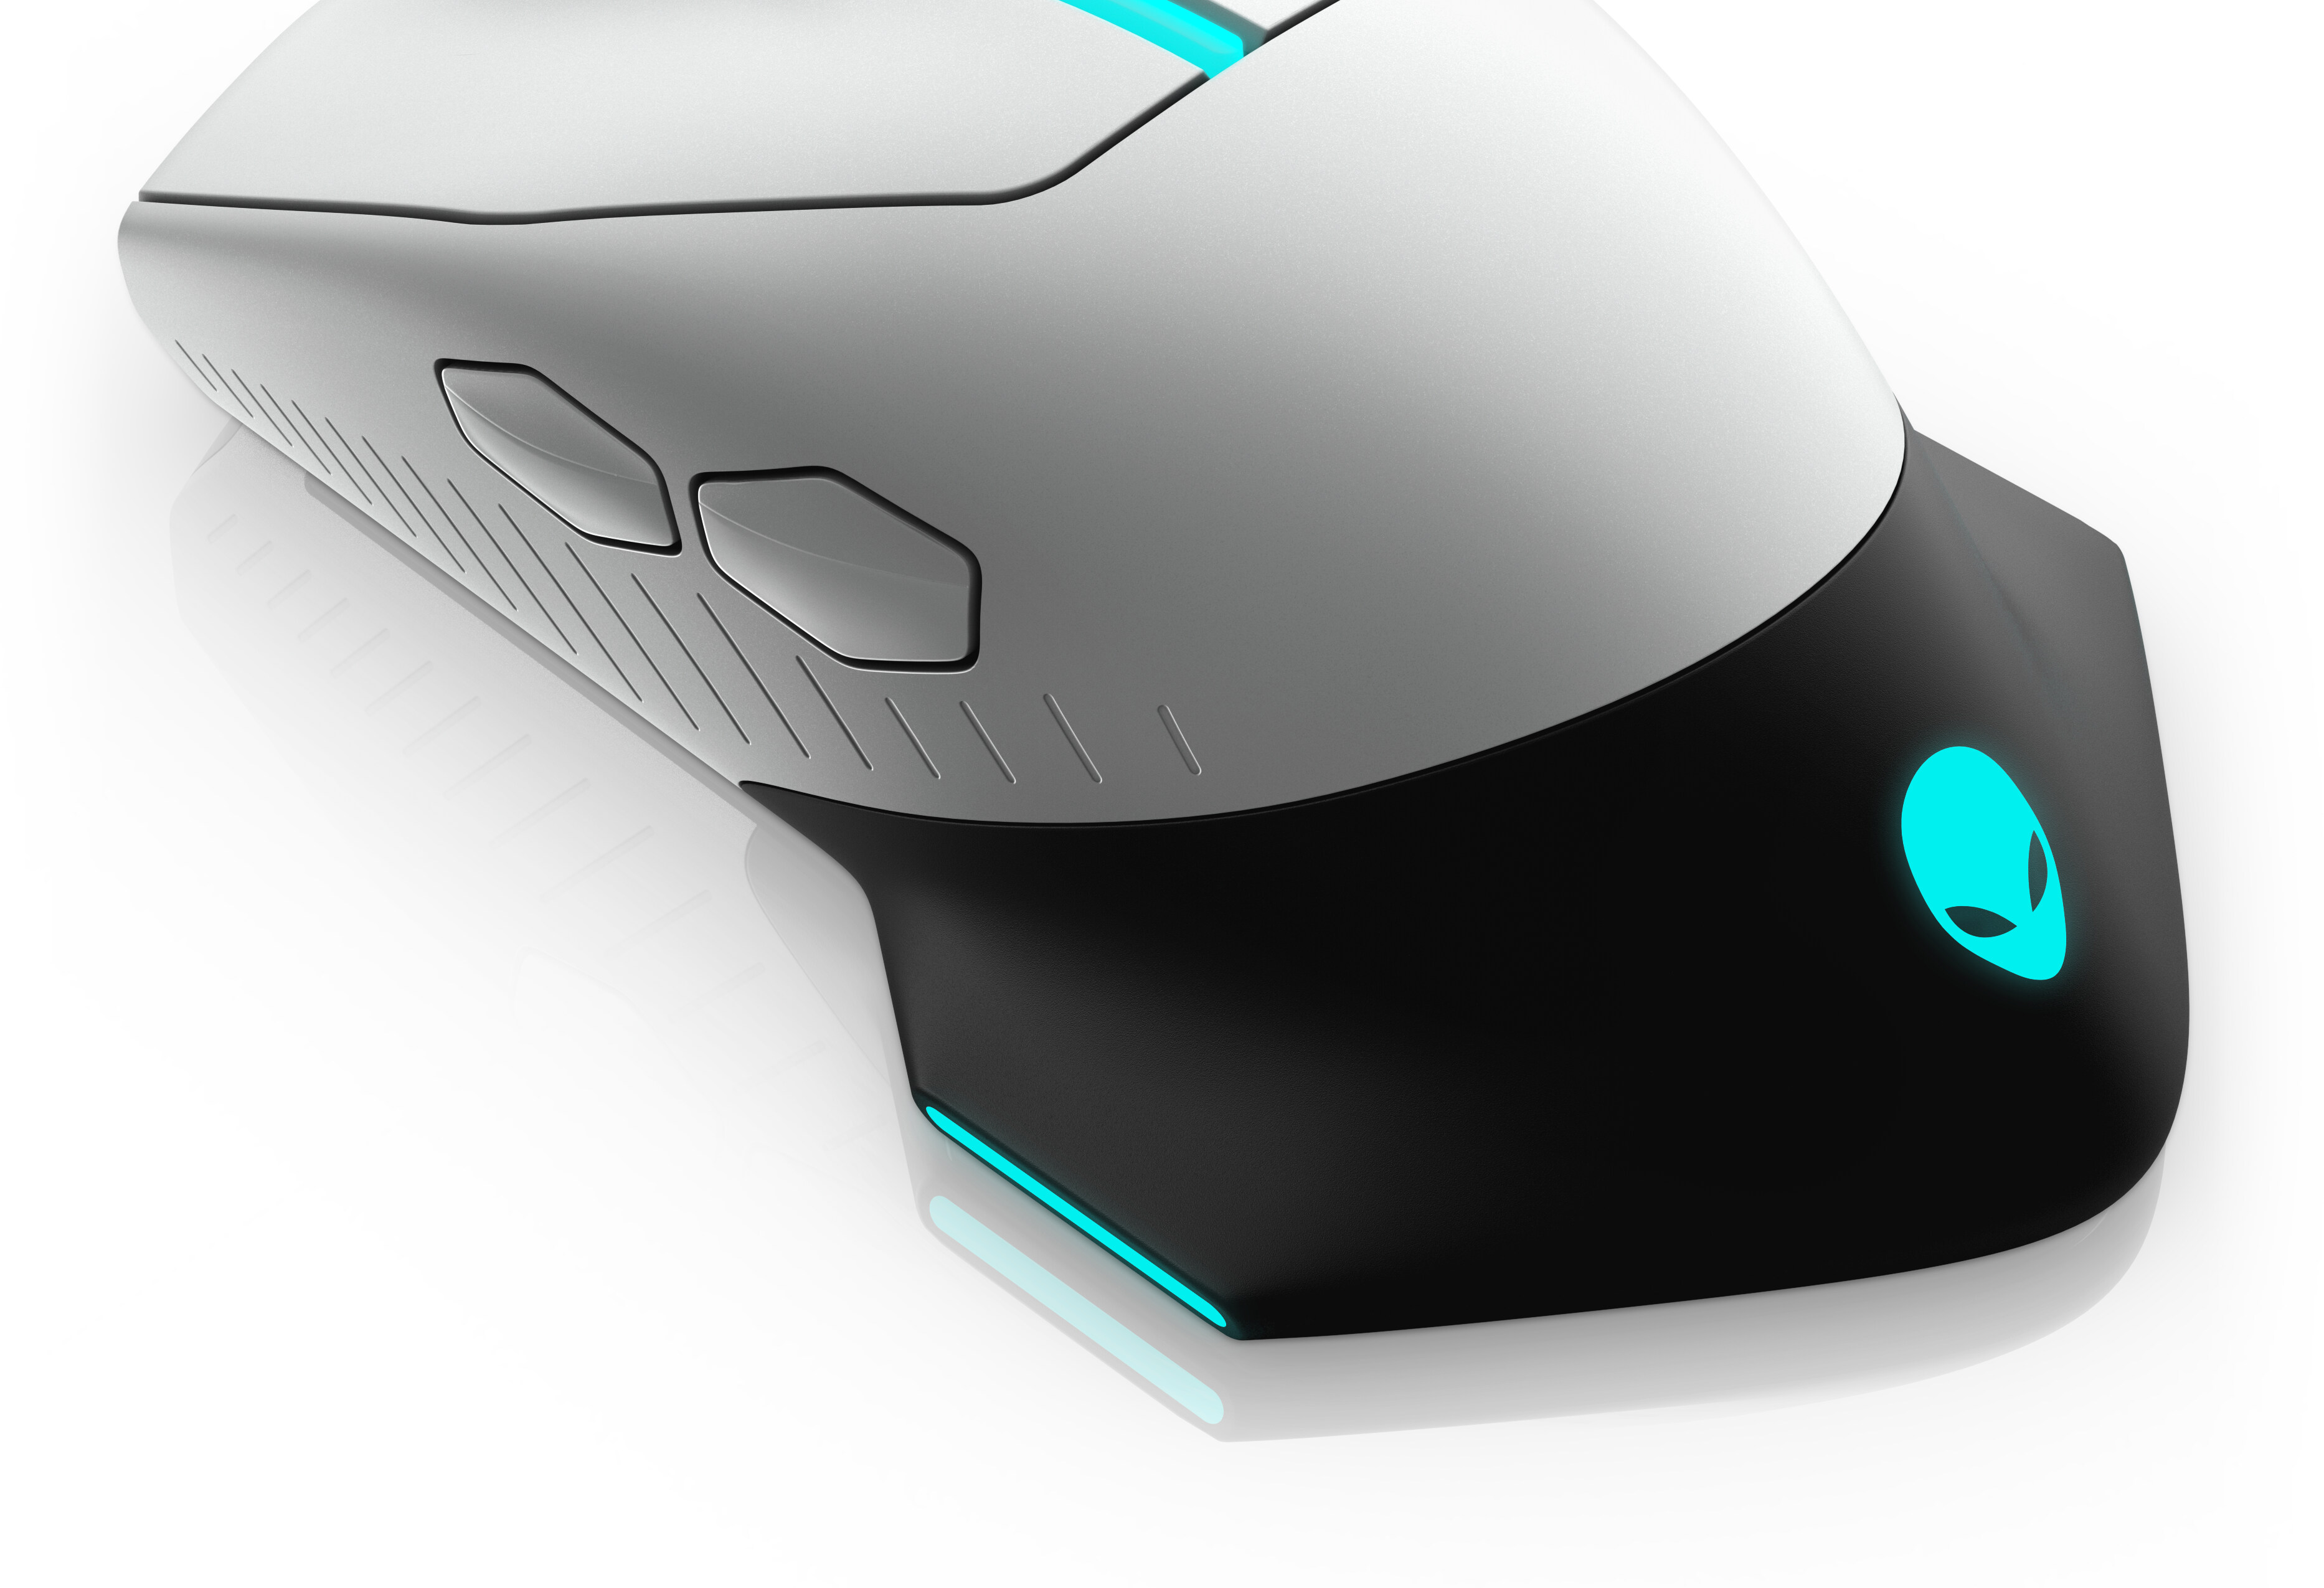 Alienware Wired/Wireless Gaming Mouse - AW610M - Lunar Light